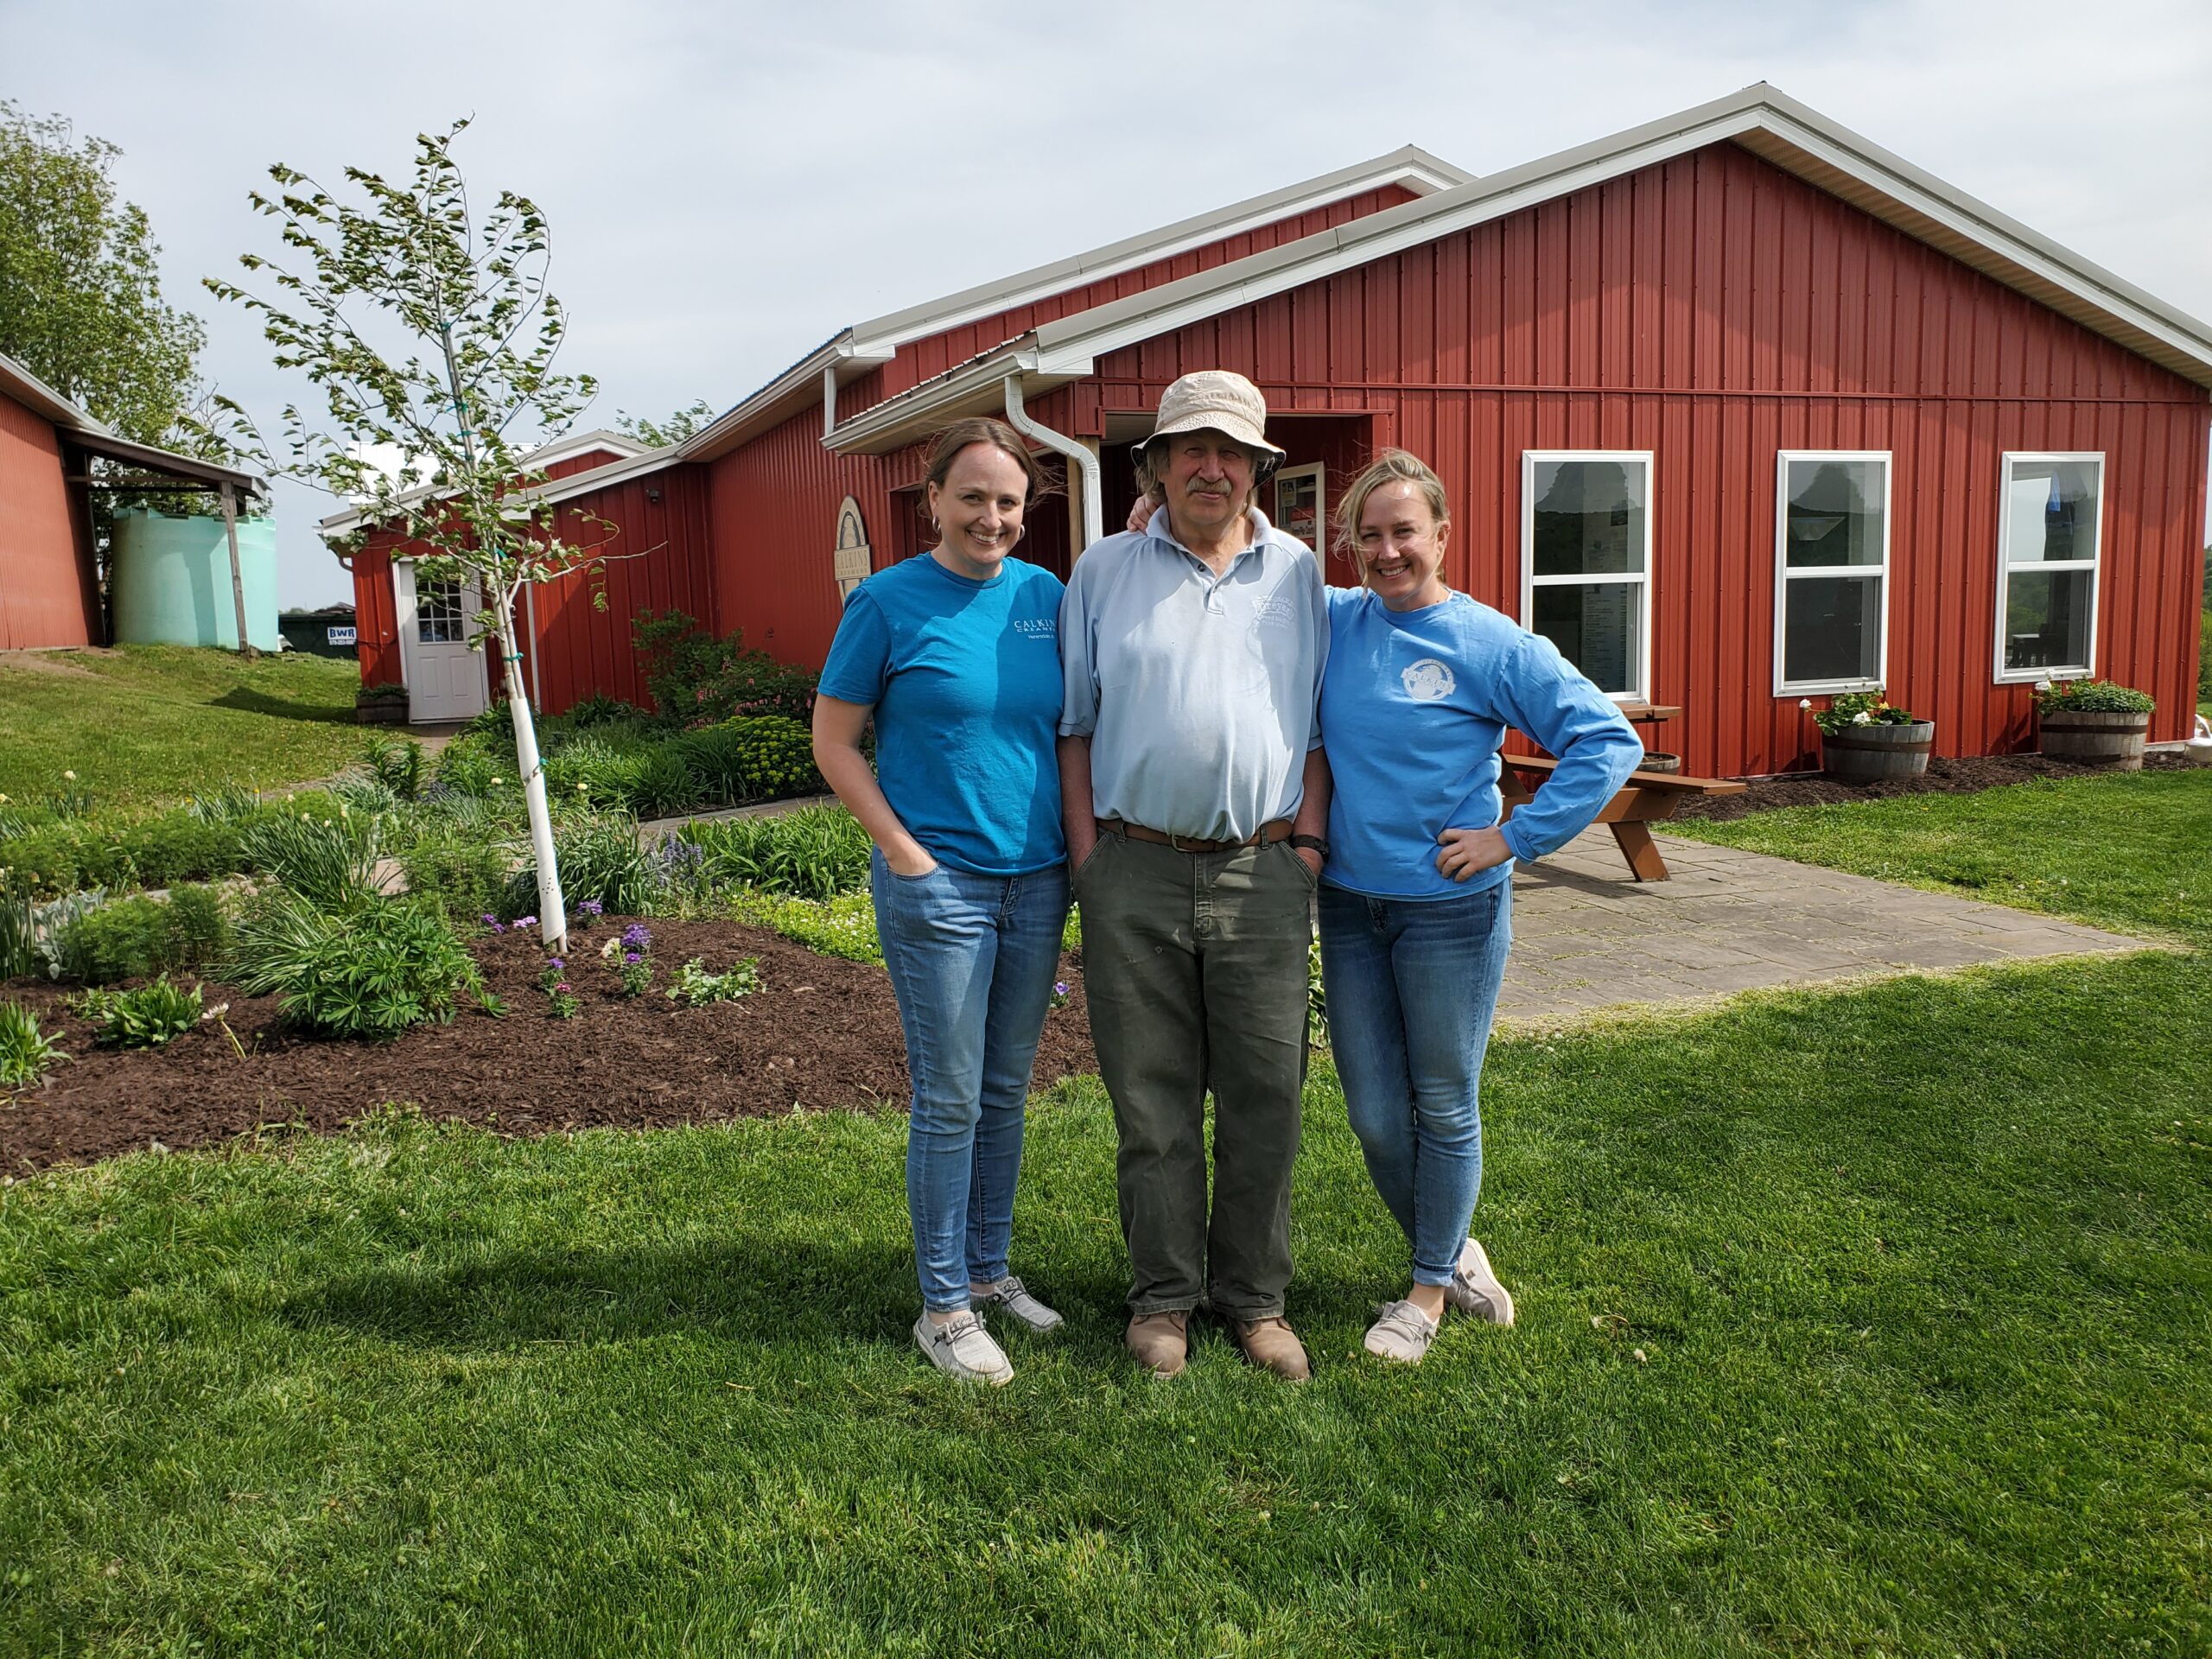 A family of dairy farmers dressed in blue t-shirts standing in a garden in front of a red barn.